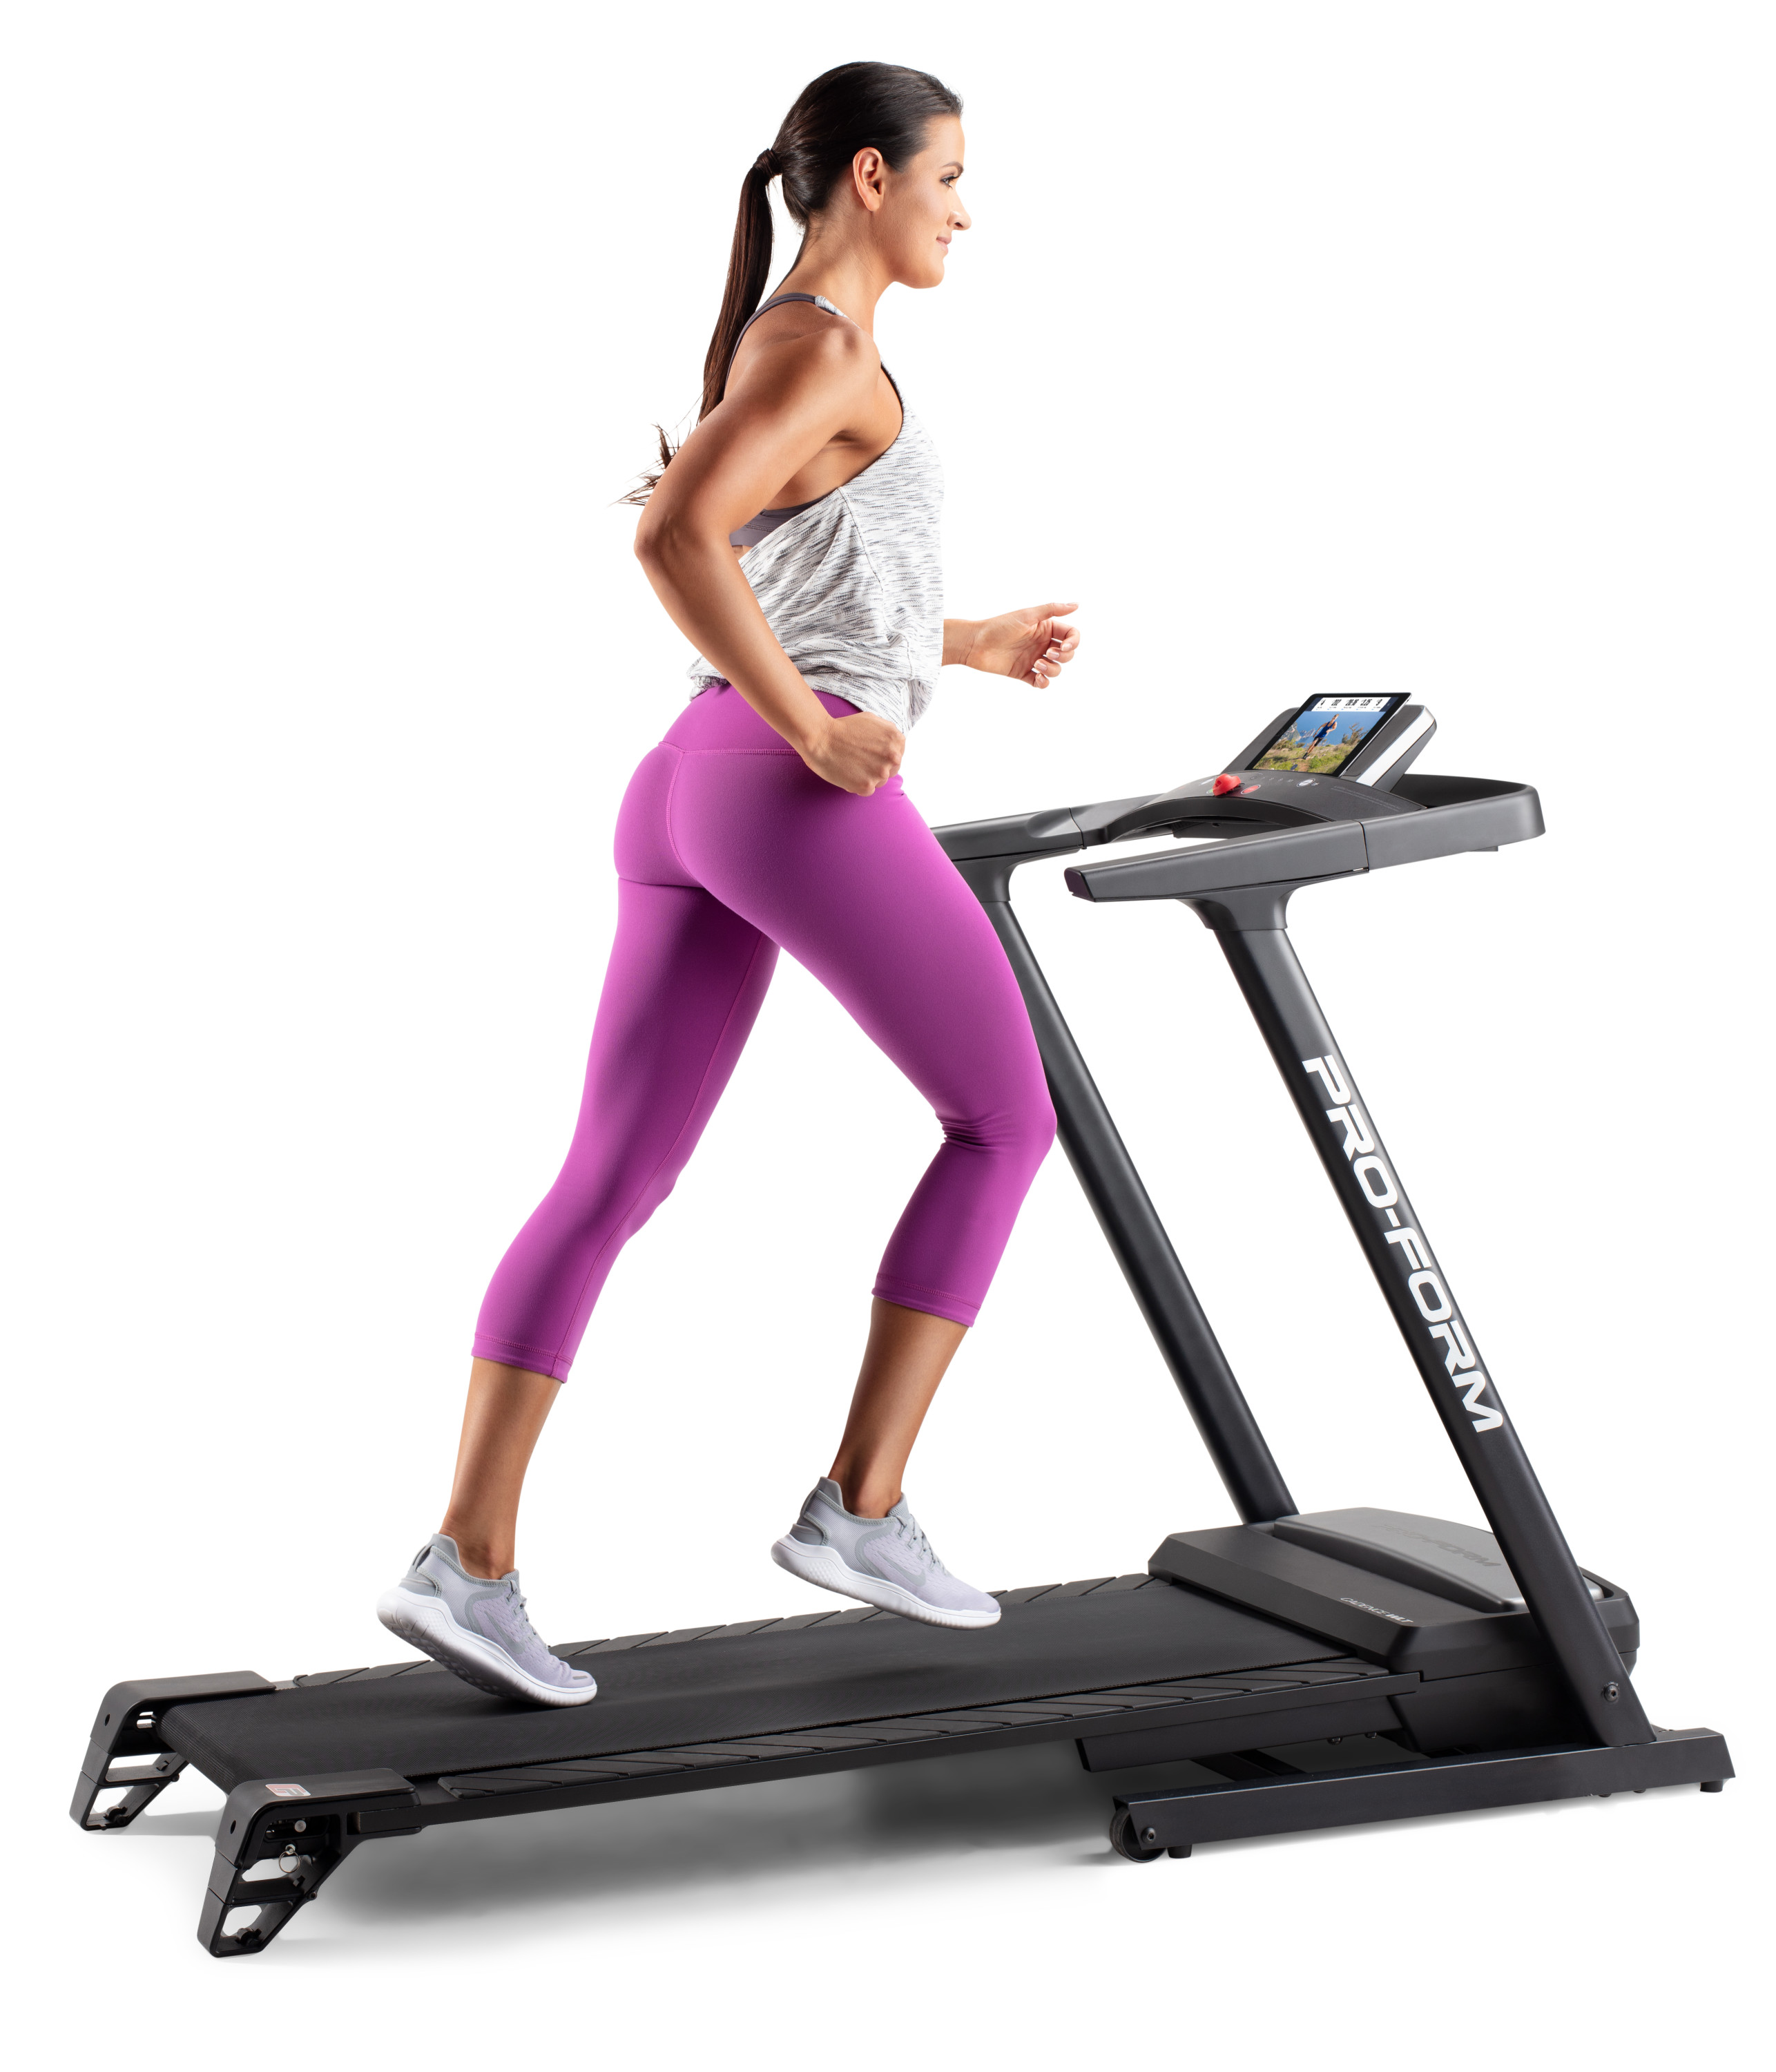 ProForm Cadence WLT Folding Treadmill with Reflex Deck for Walking and Jogging, iFit Bluetooth Enabled - image 26 of 31